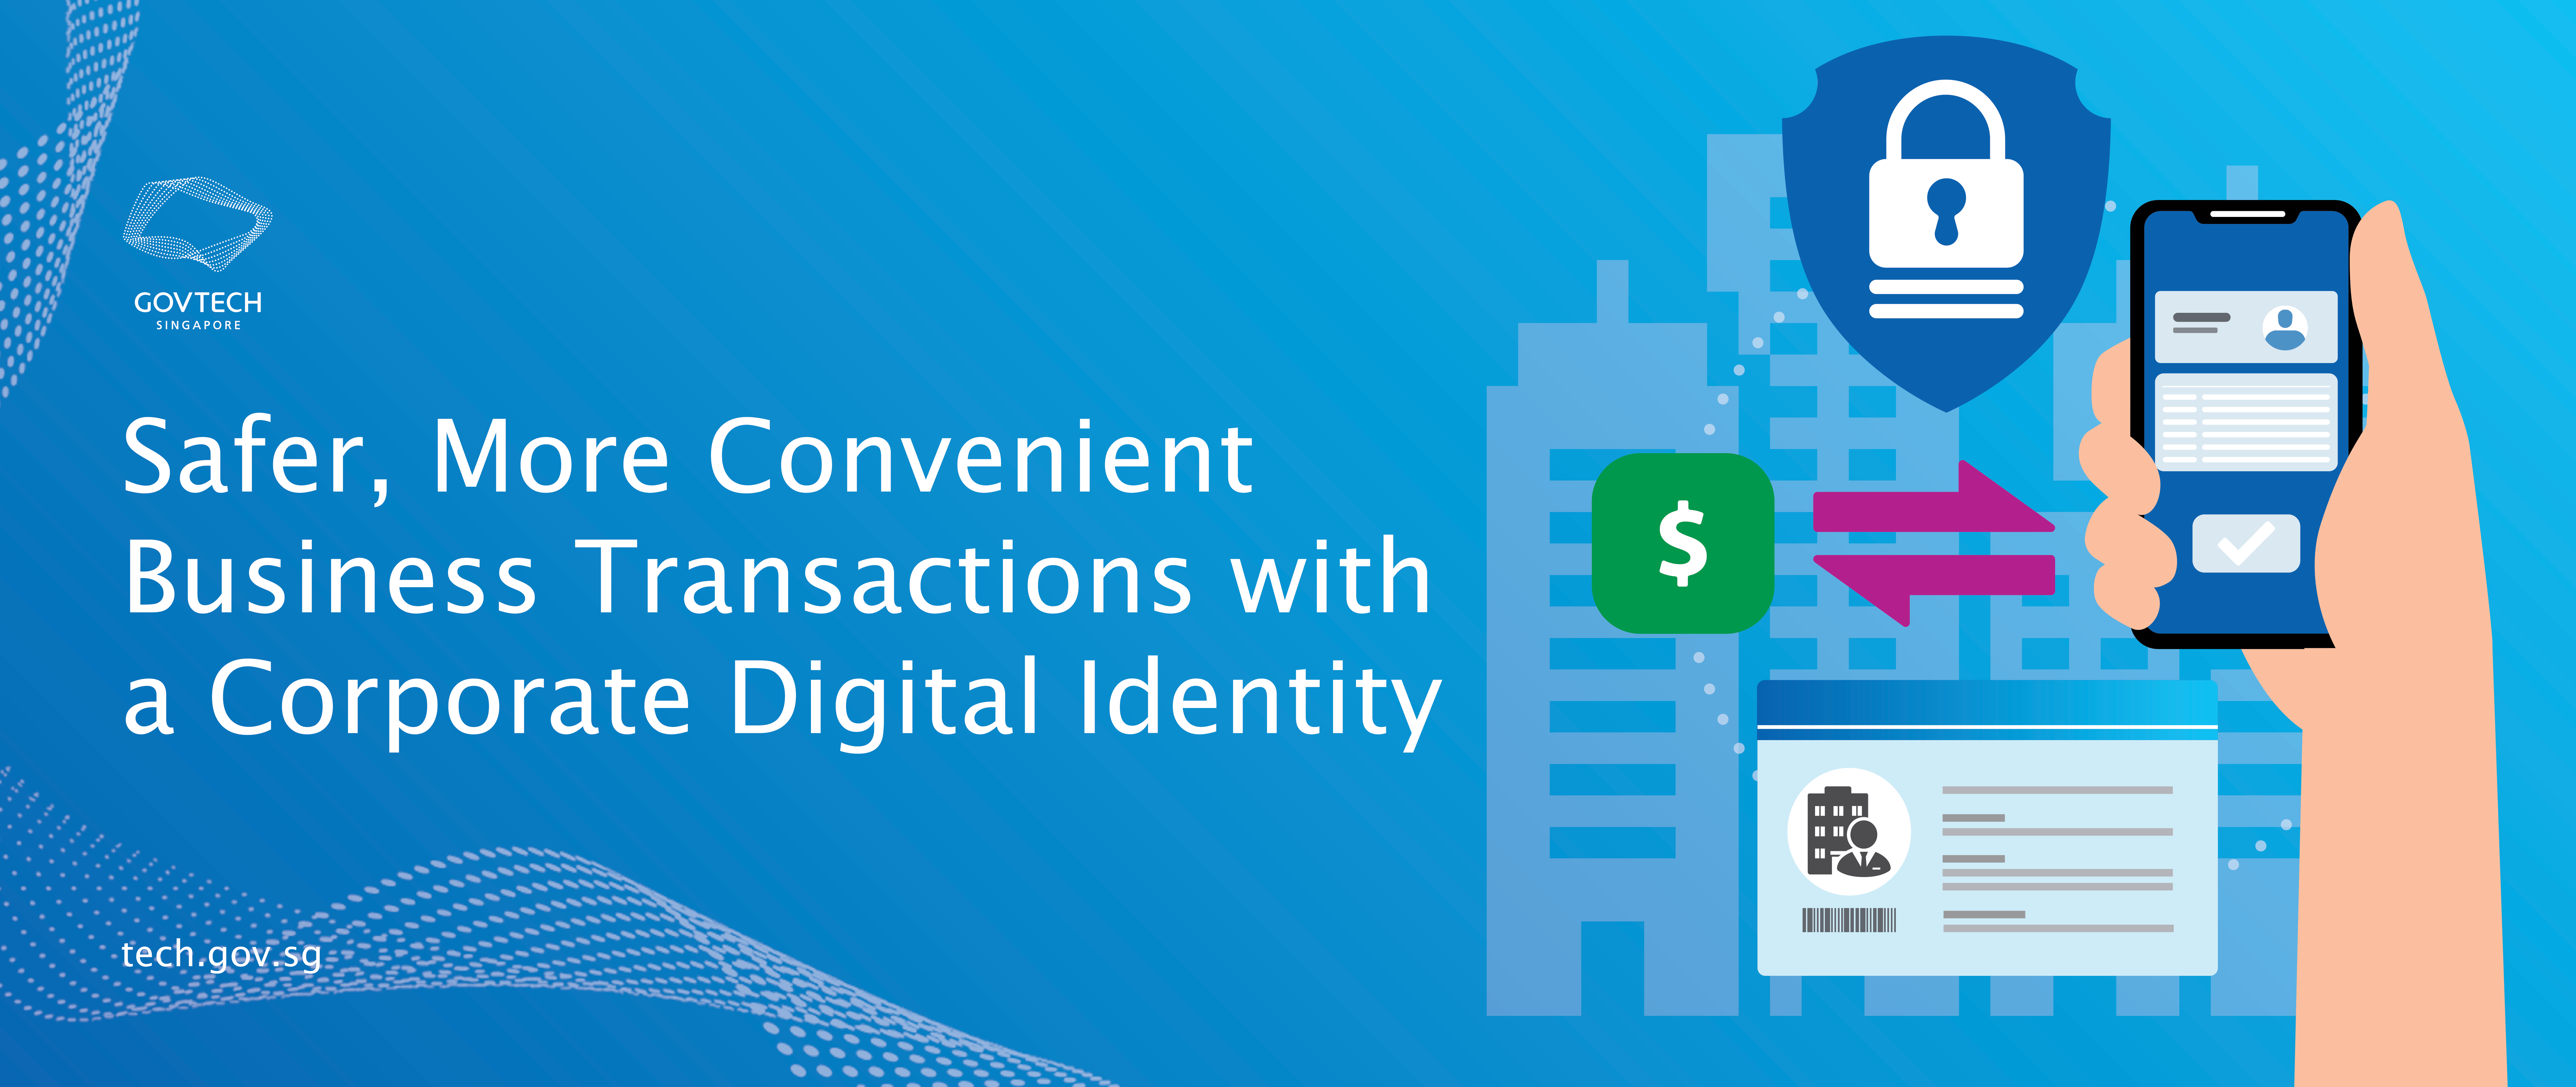 Safer, More Convenient Business Transactions with a Corporate Digital Identity